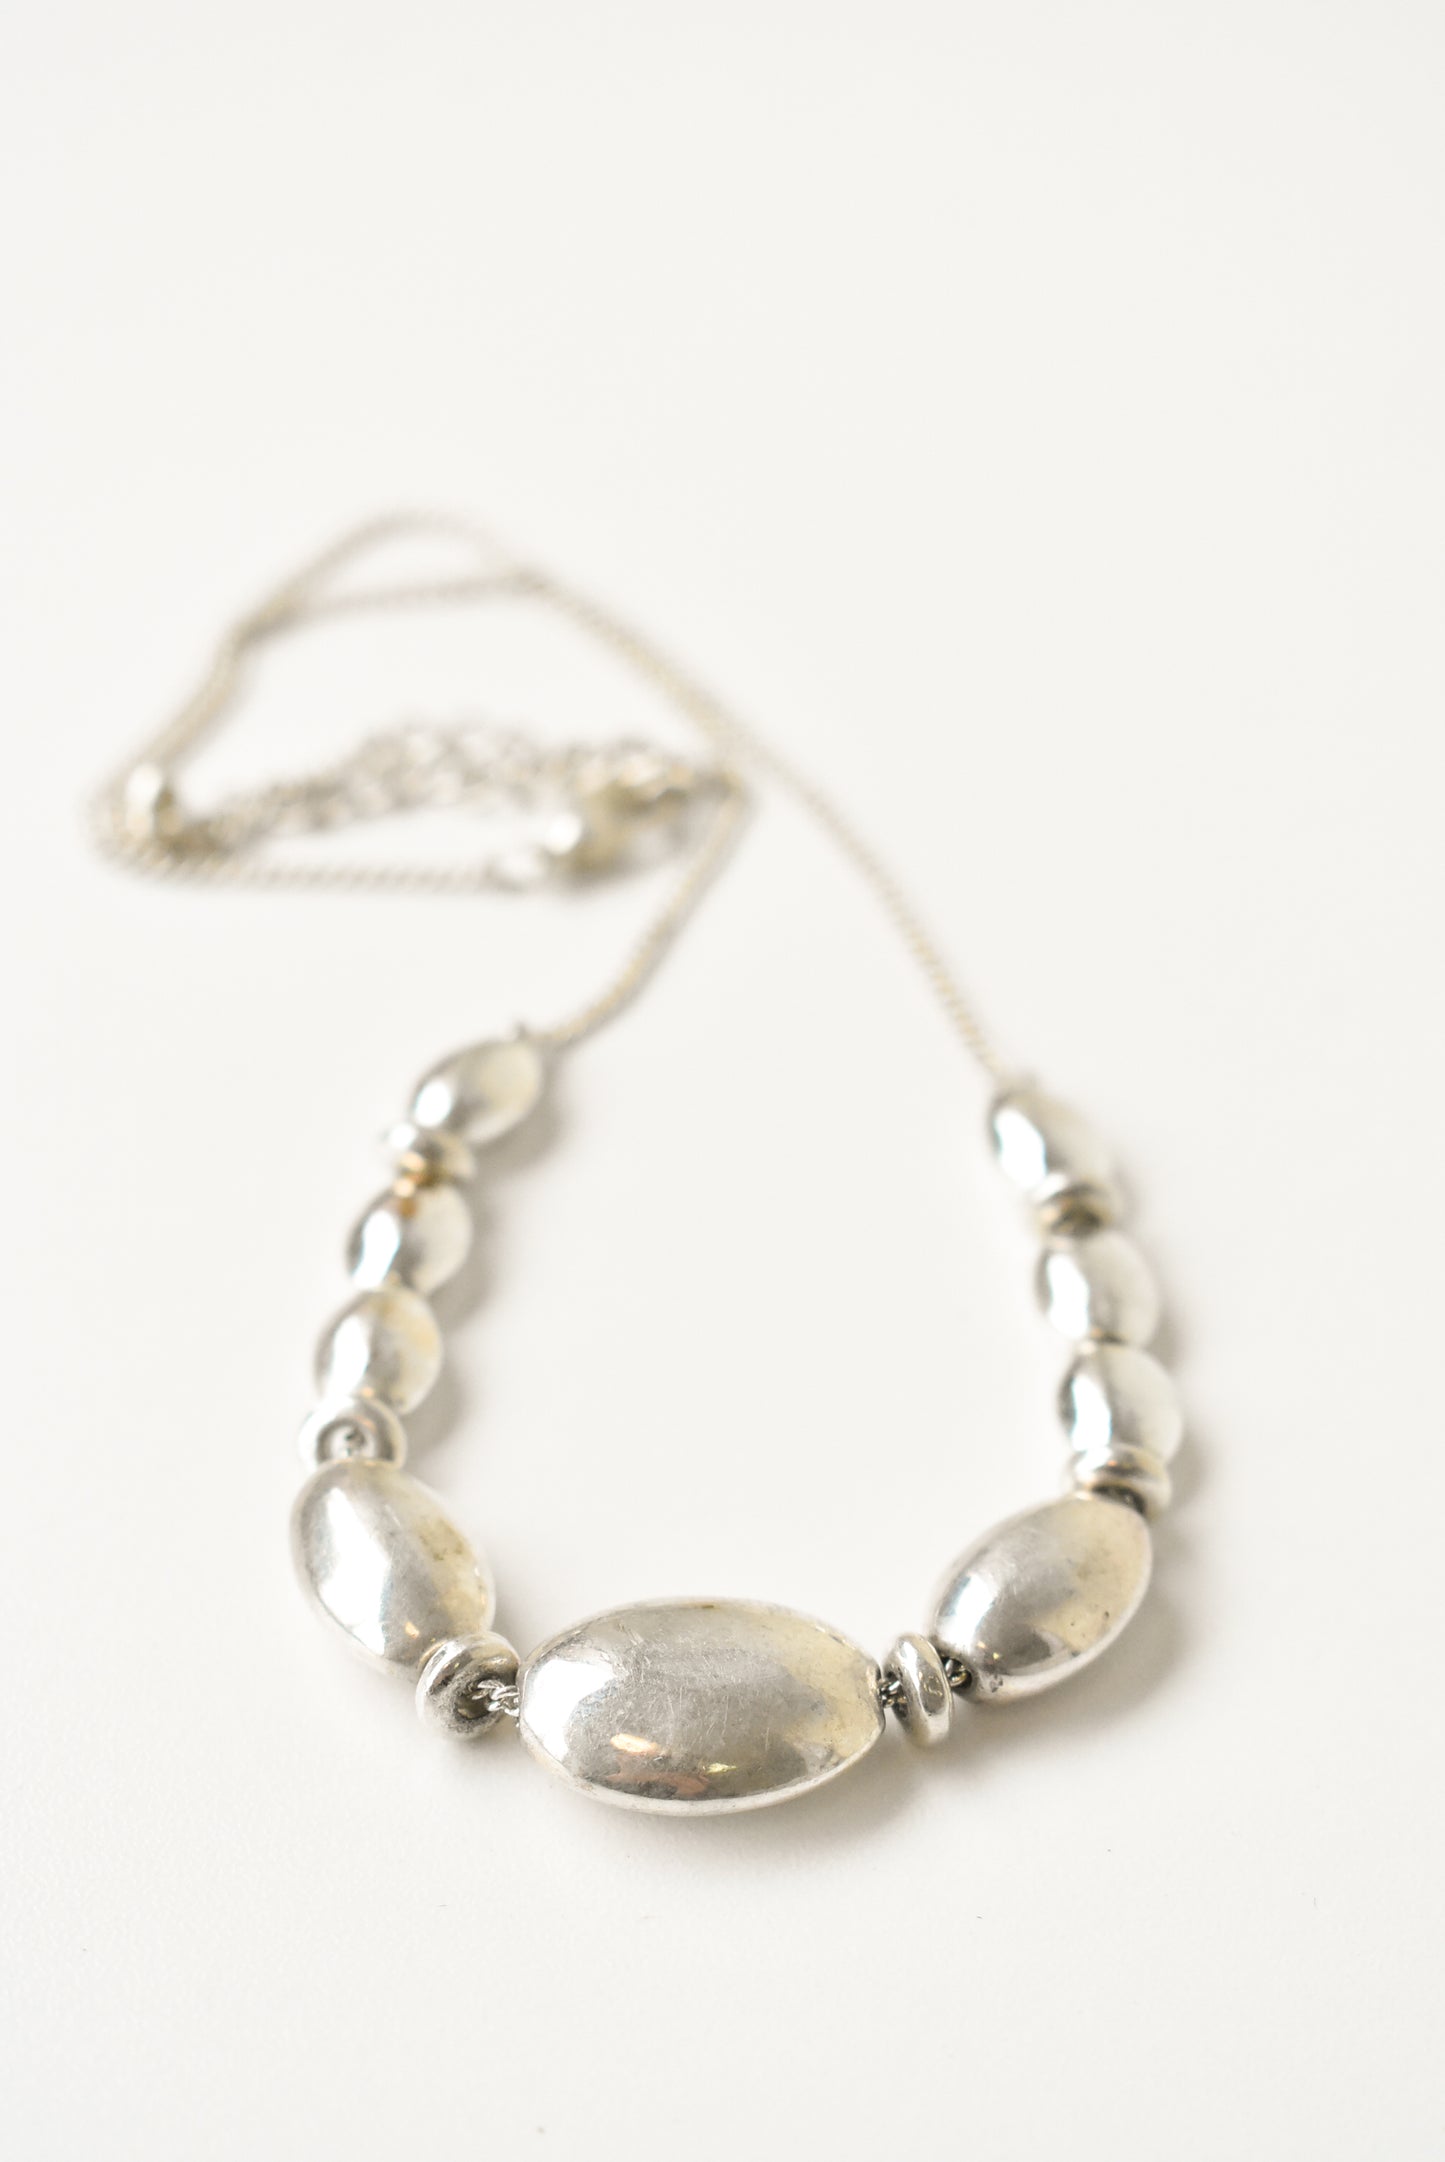 Silver oval beads necklace